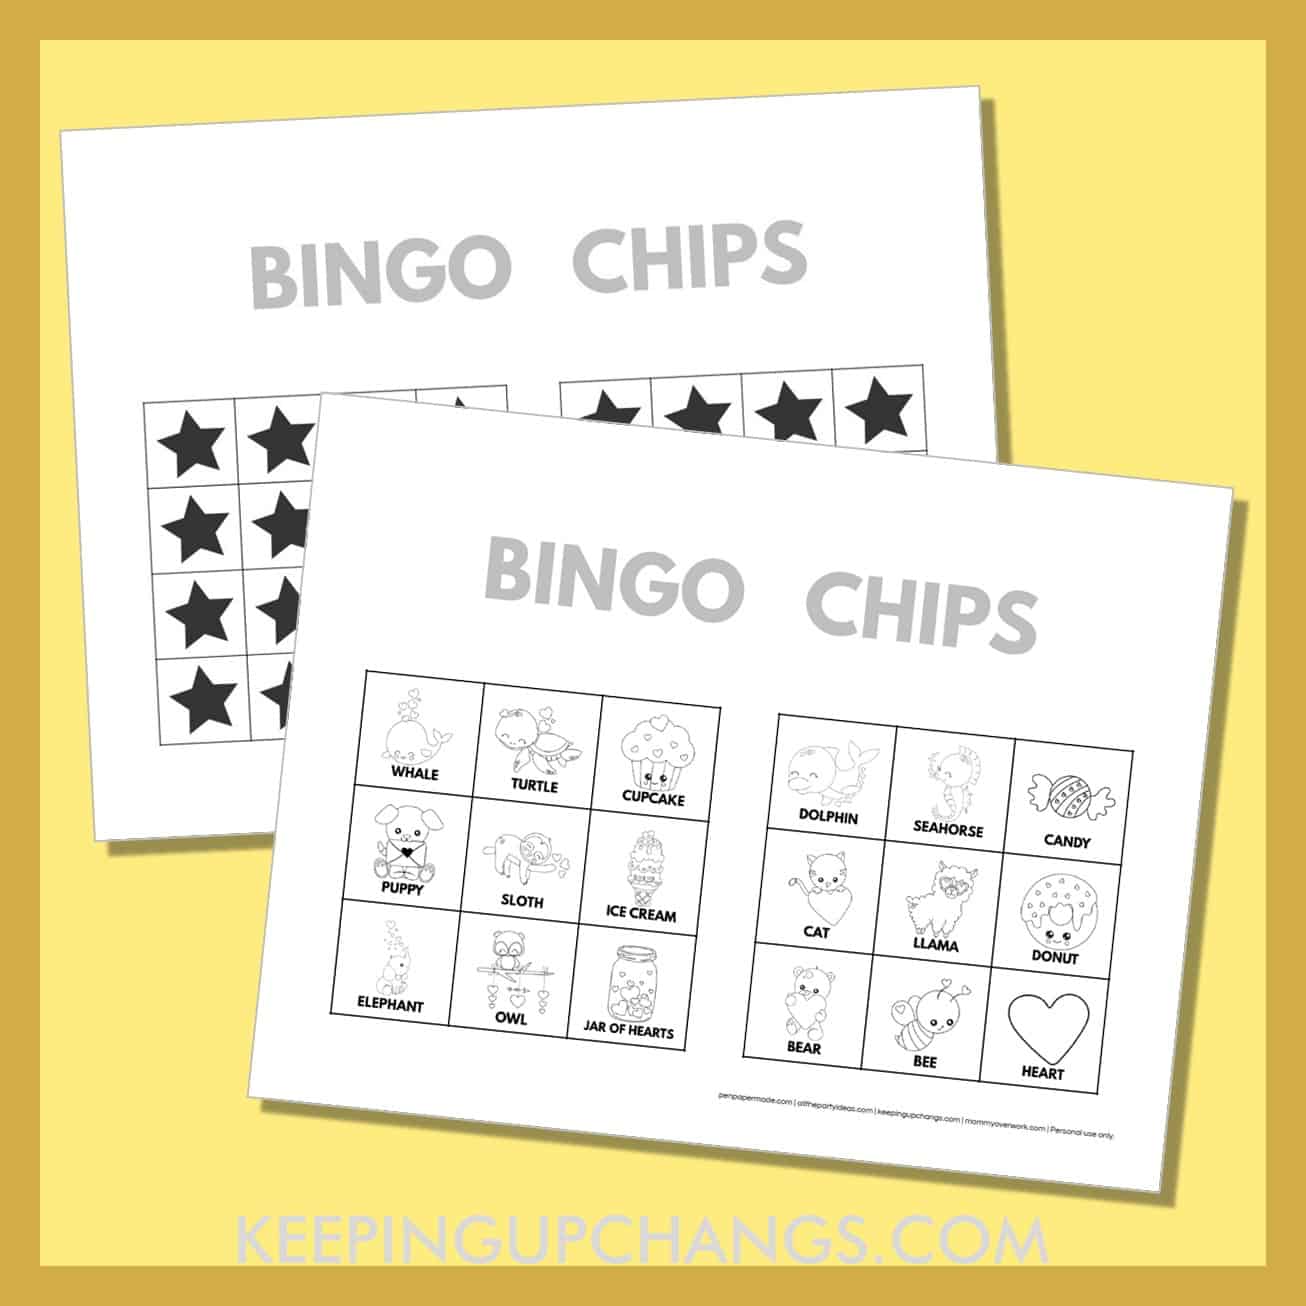 free valentine's day bingo card 3x3 black white coloring game chips, tokens, markers.